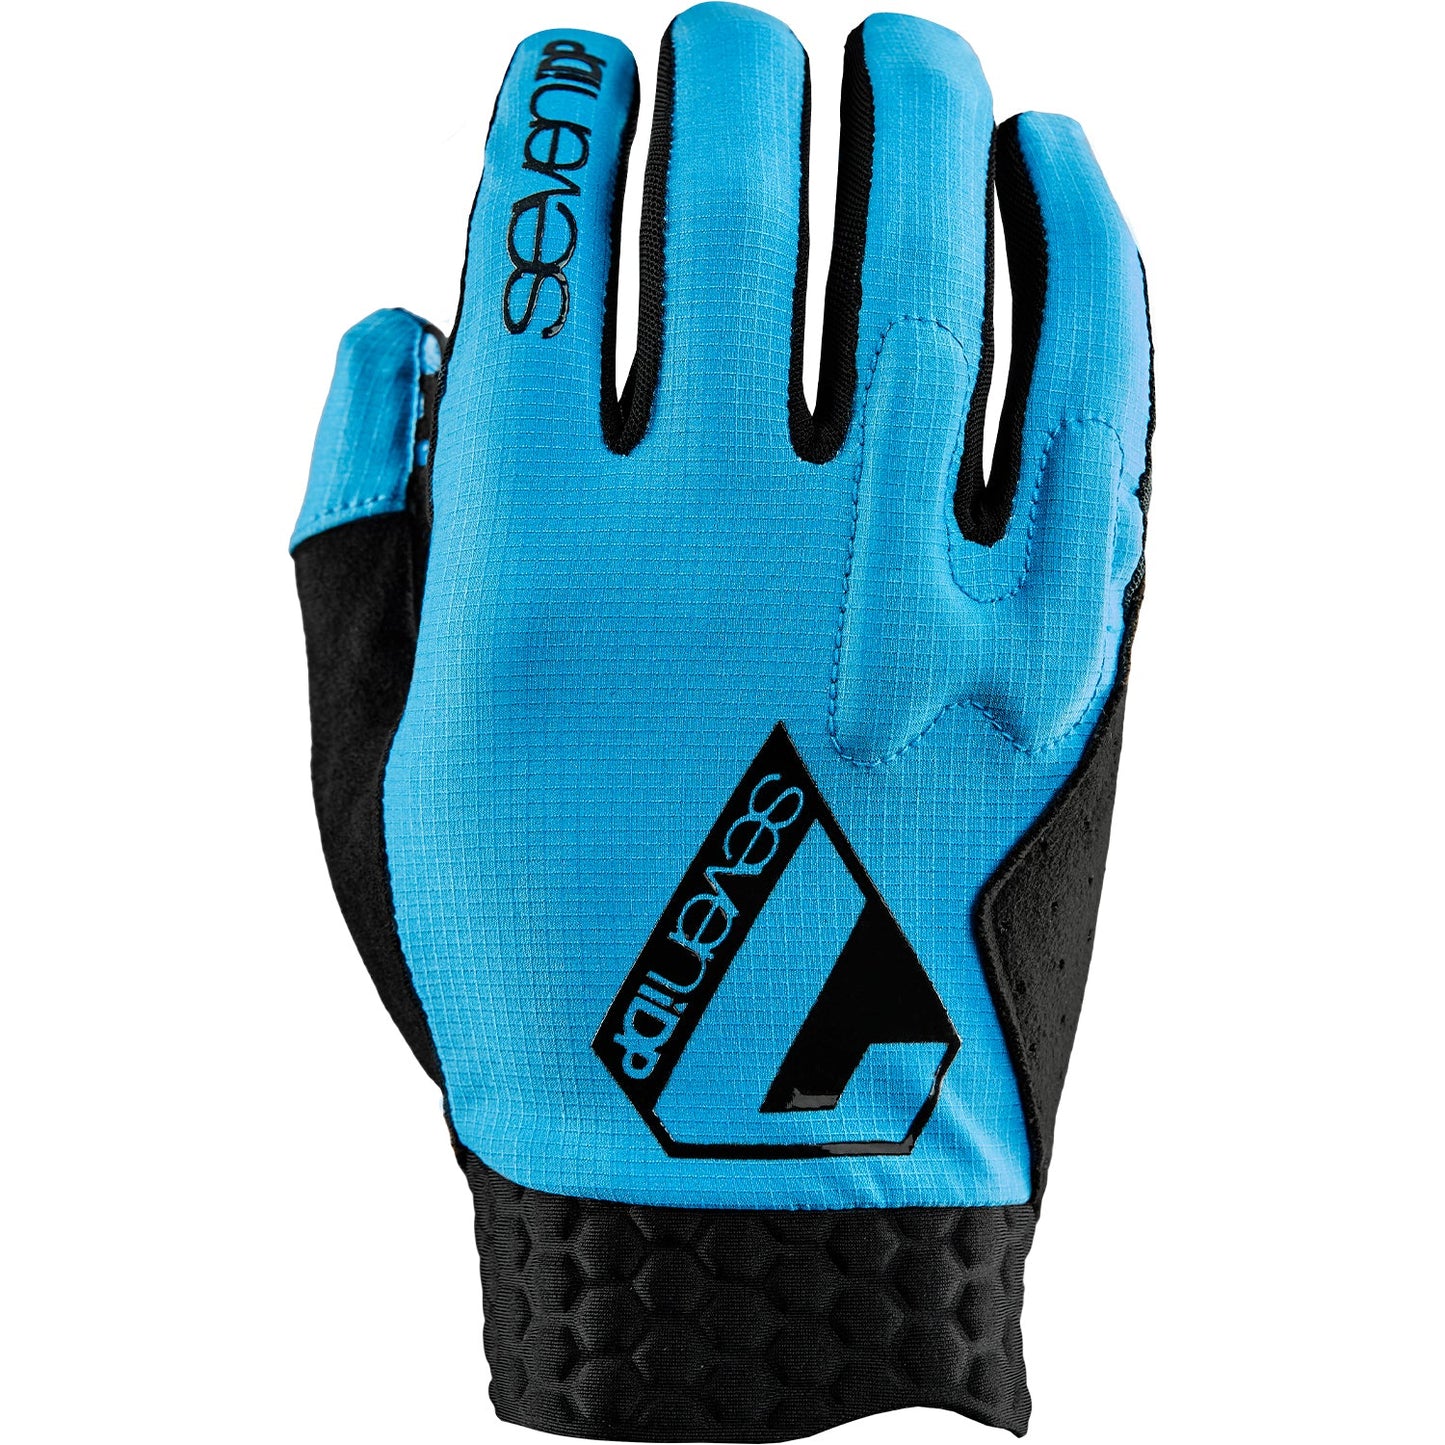 7iDP PROJECT GLOVE BLUE LARGE